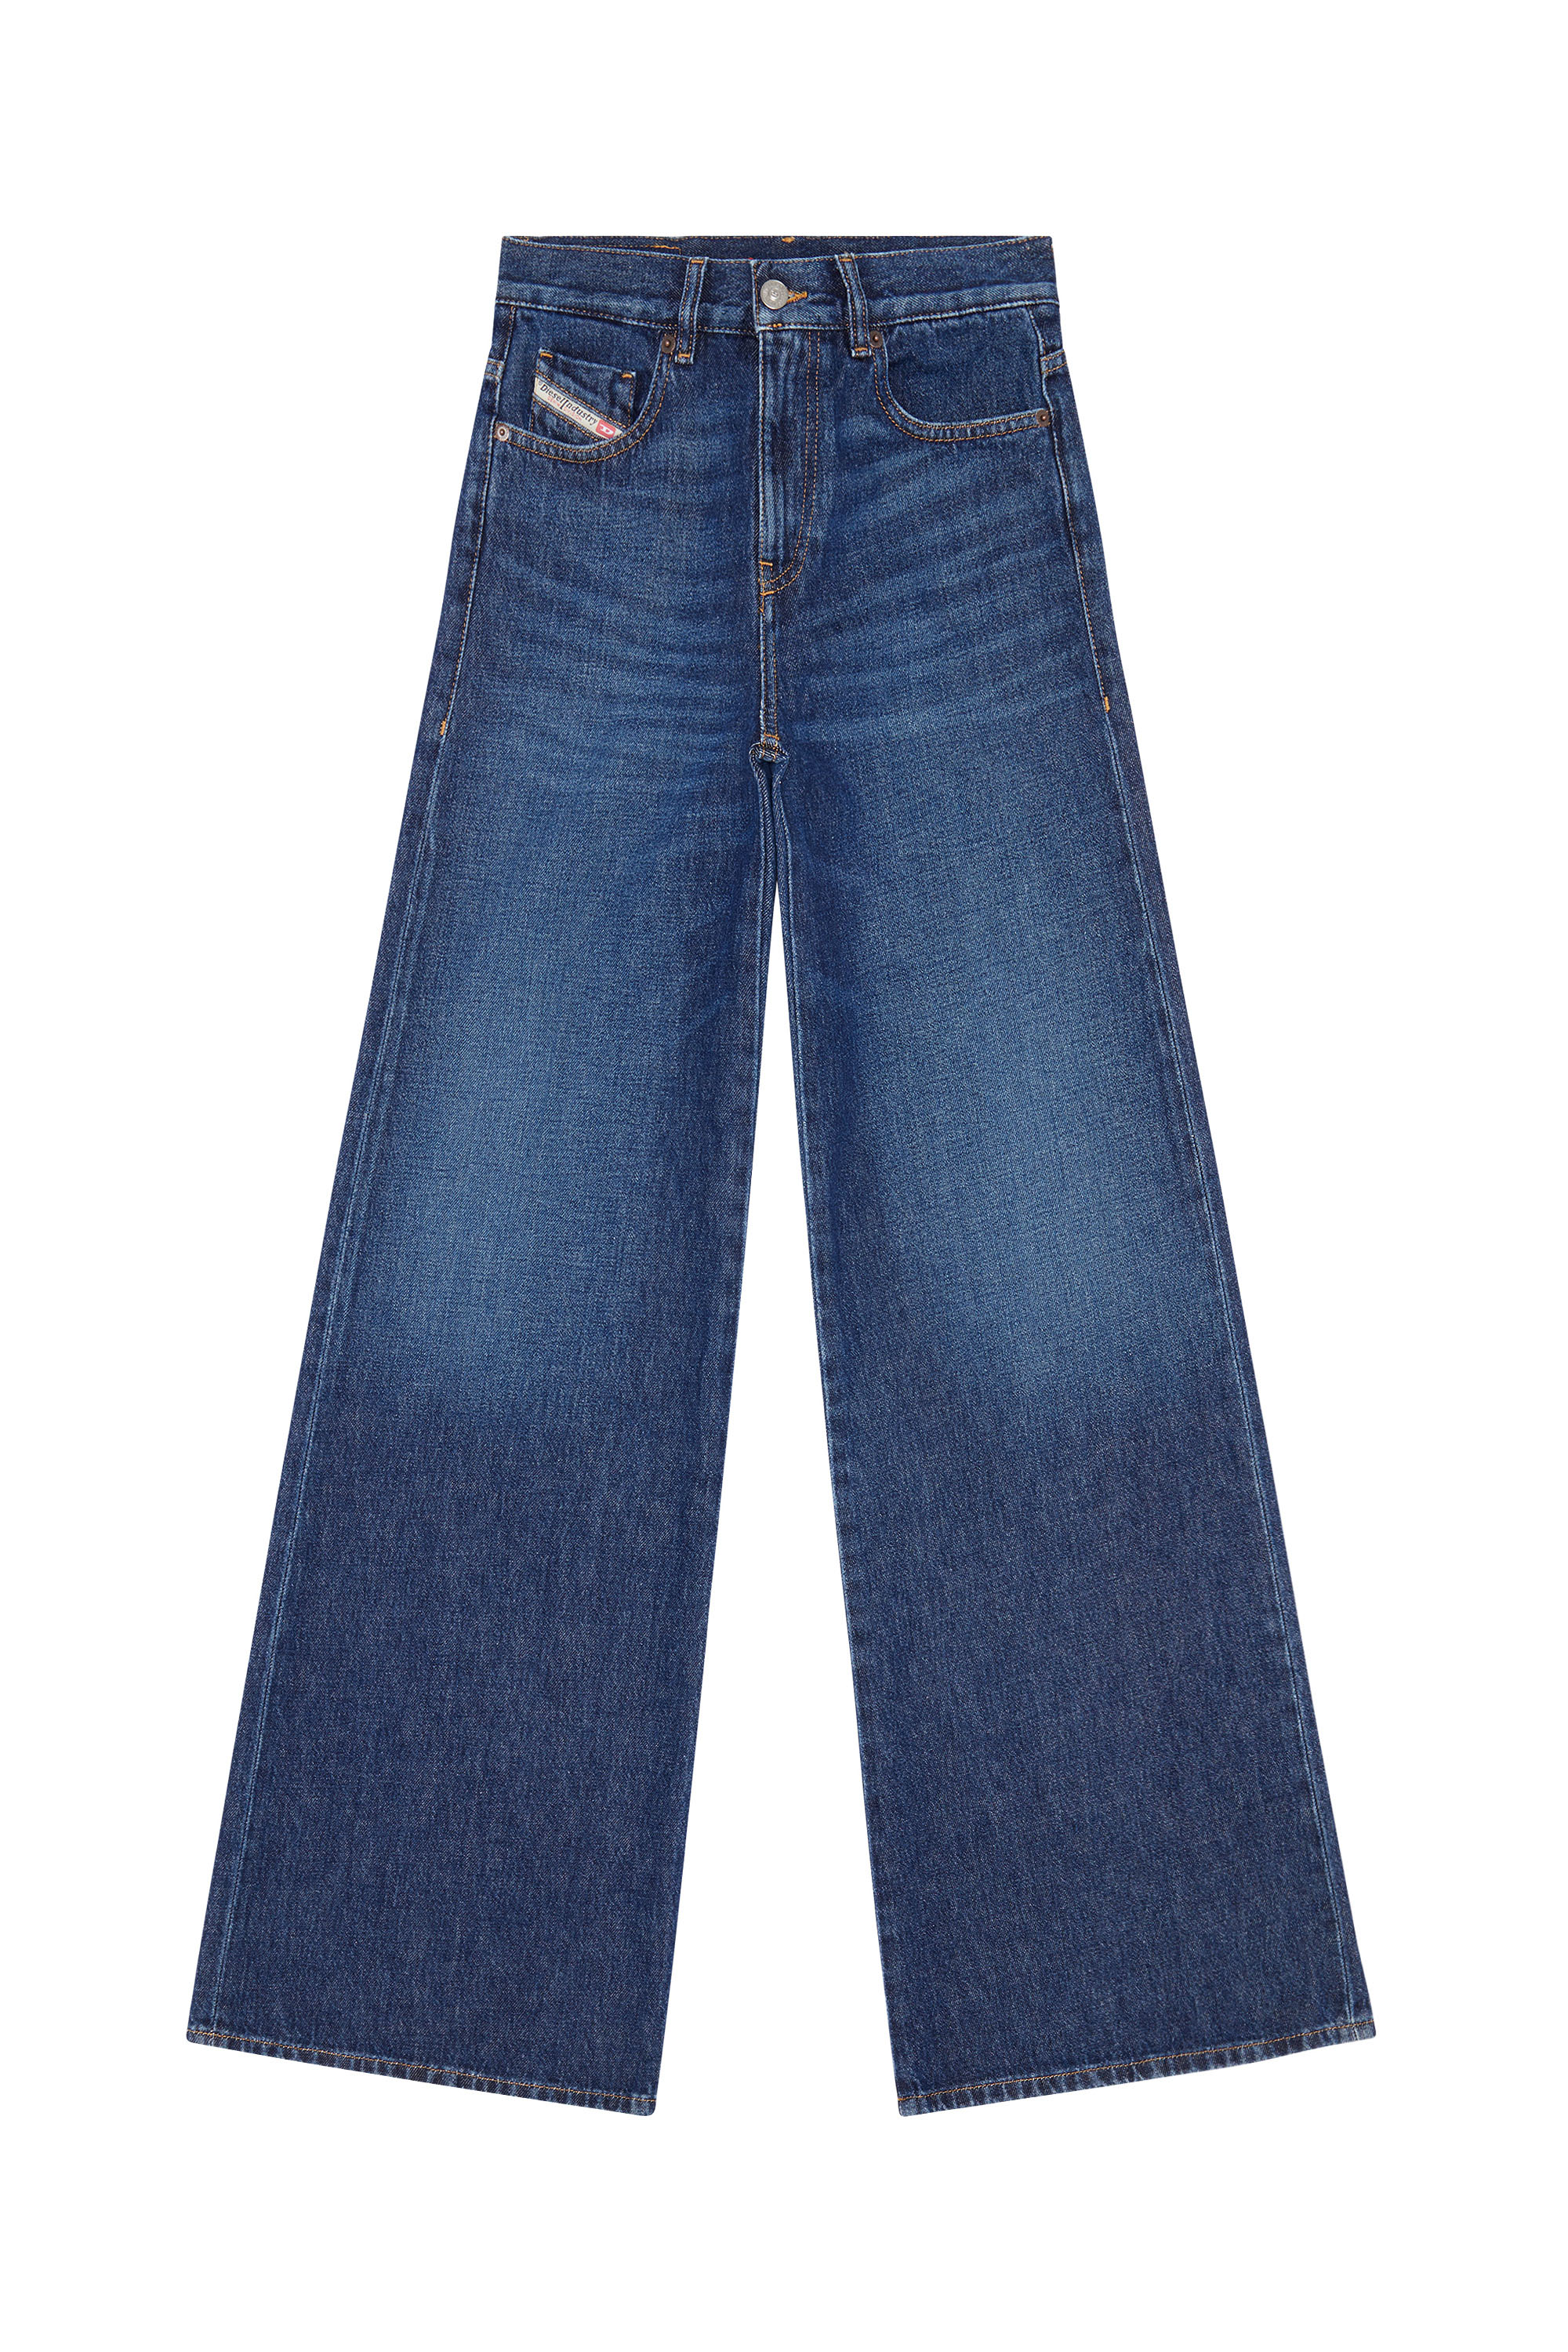 1978 09C03 Bootcut and Flare Jeans, Dark Blue - Jeans